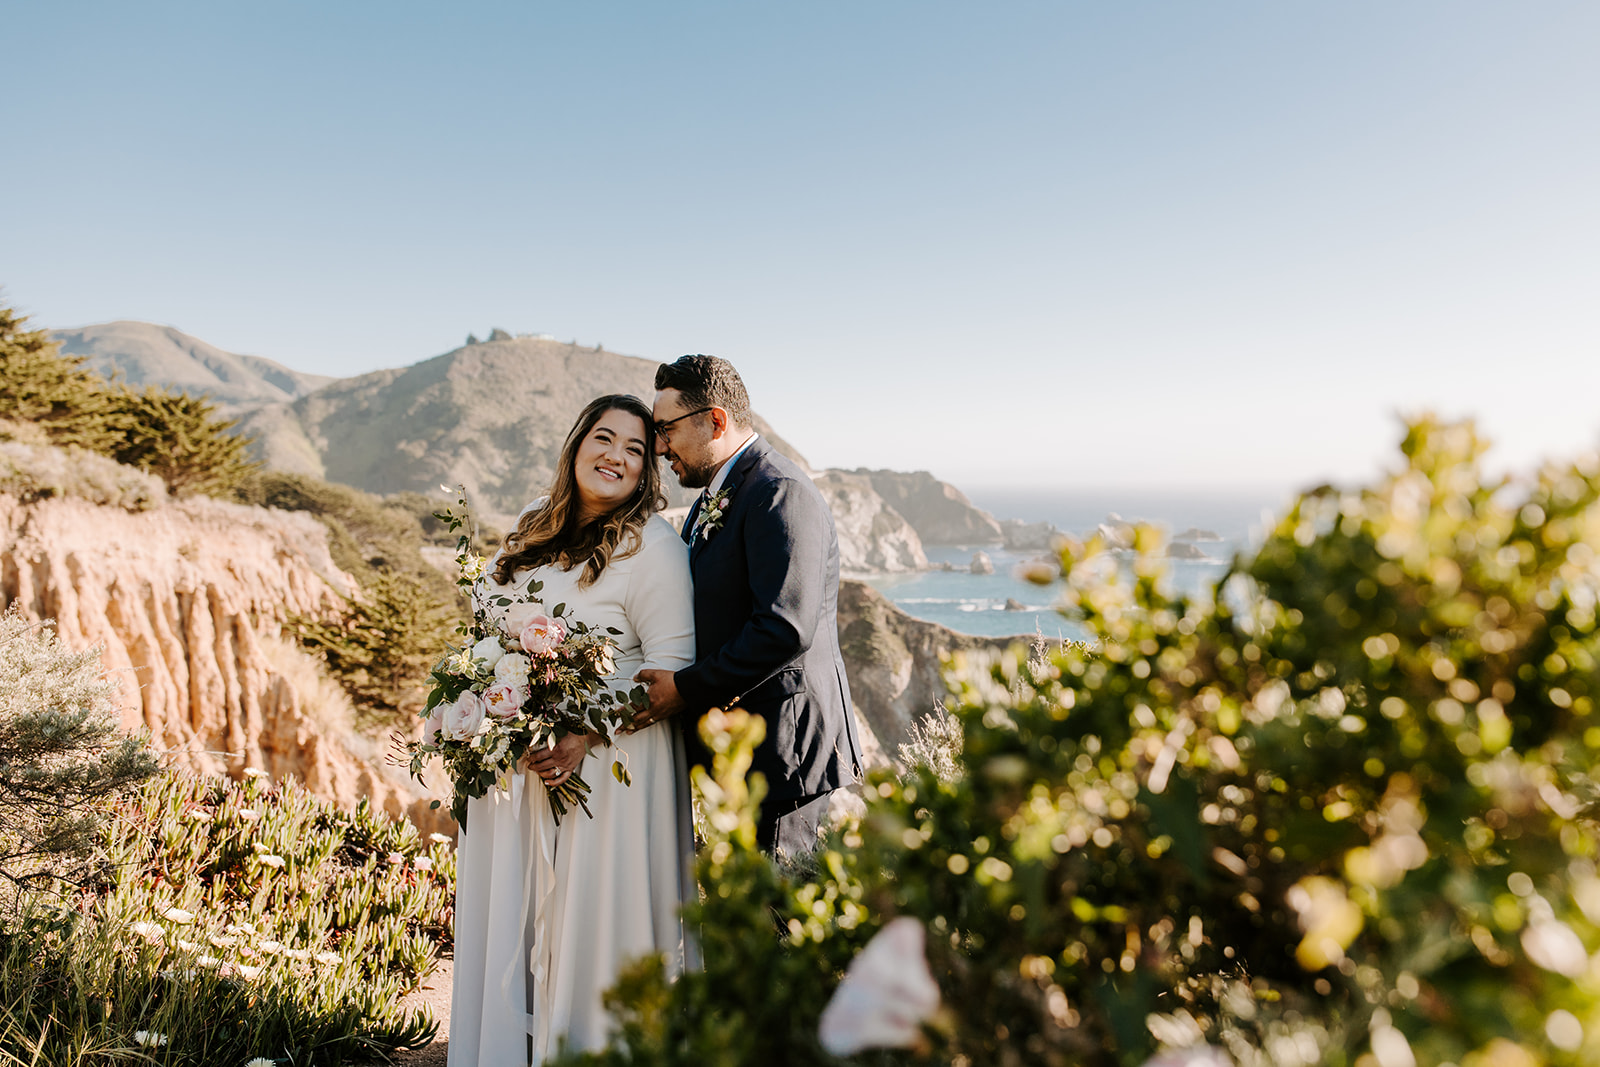 A couple who eloped in Big Sur, California embrace overlooking the coastline